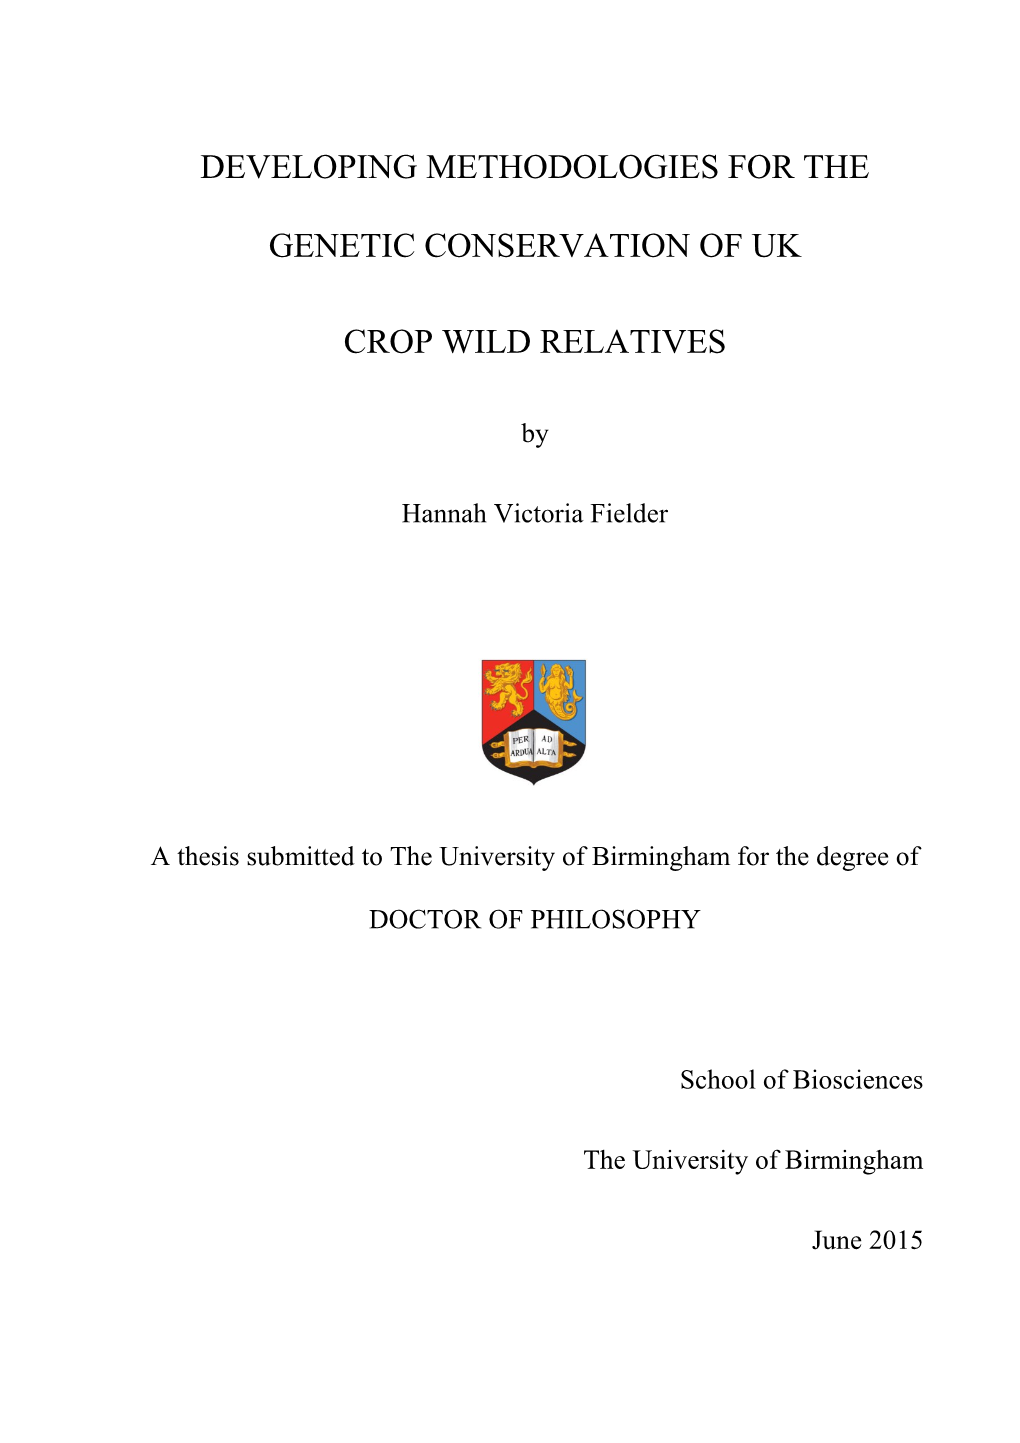 Developing Methodologies for the Genetic Conservation of UK Crop Wild Relatives